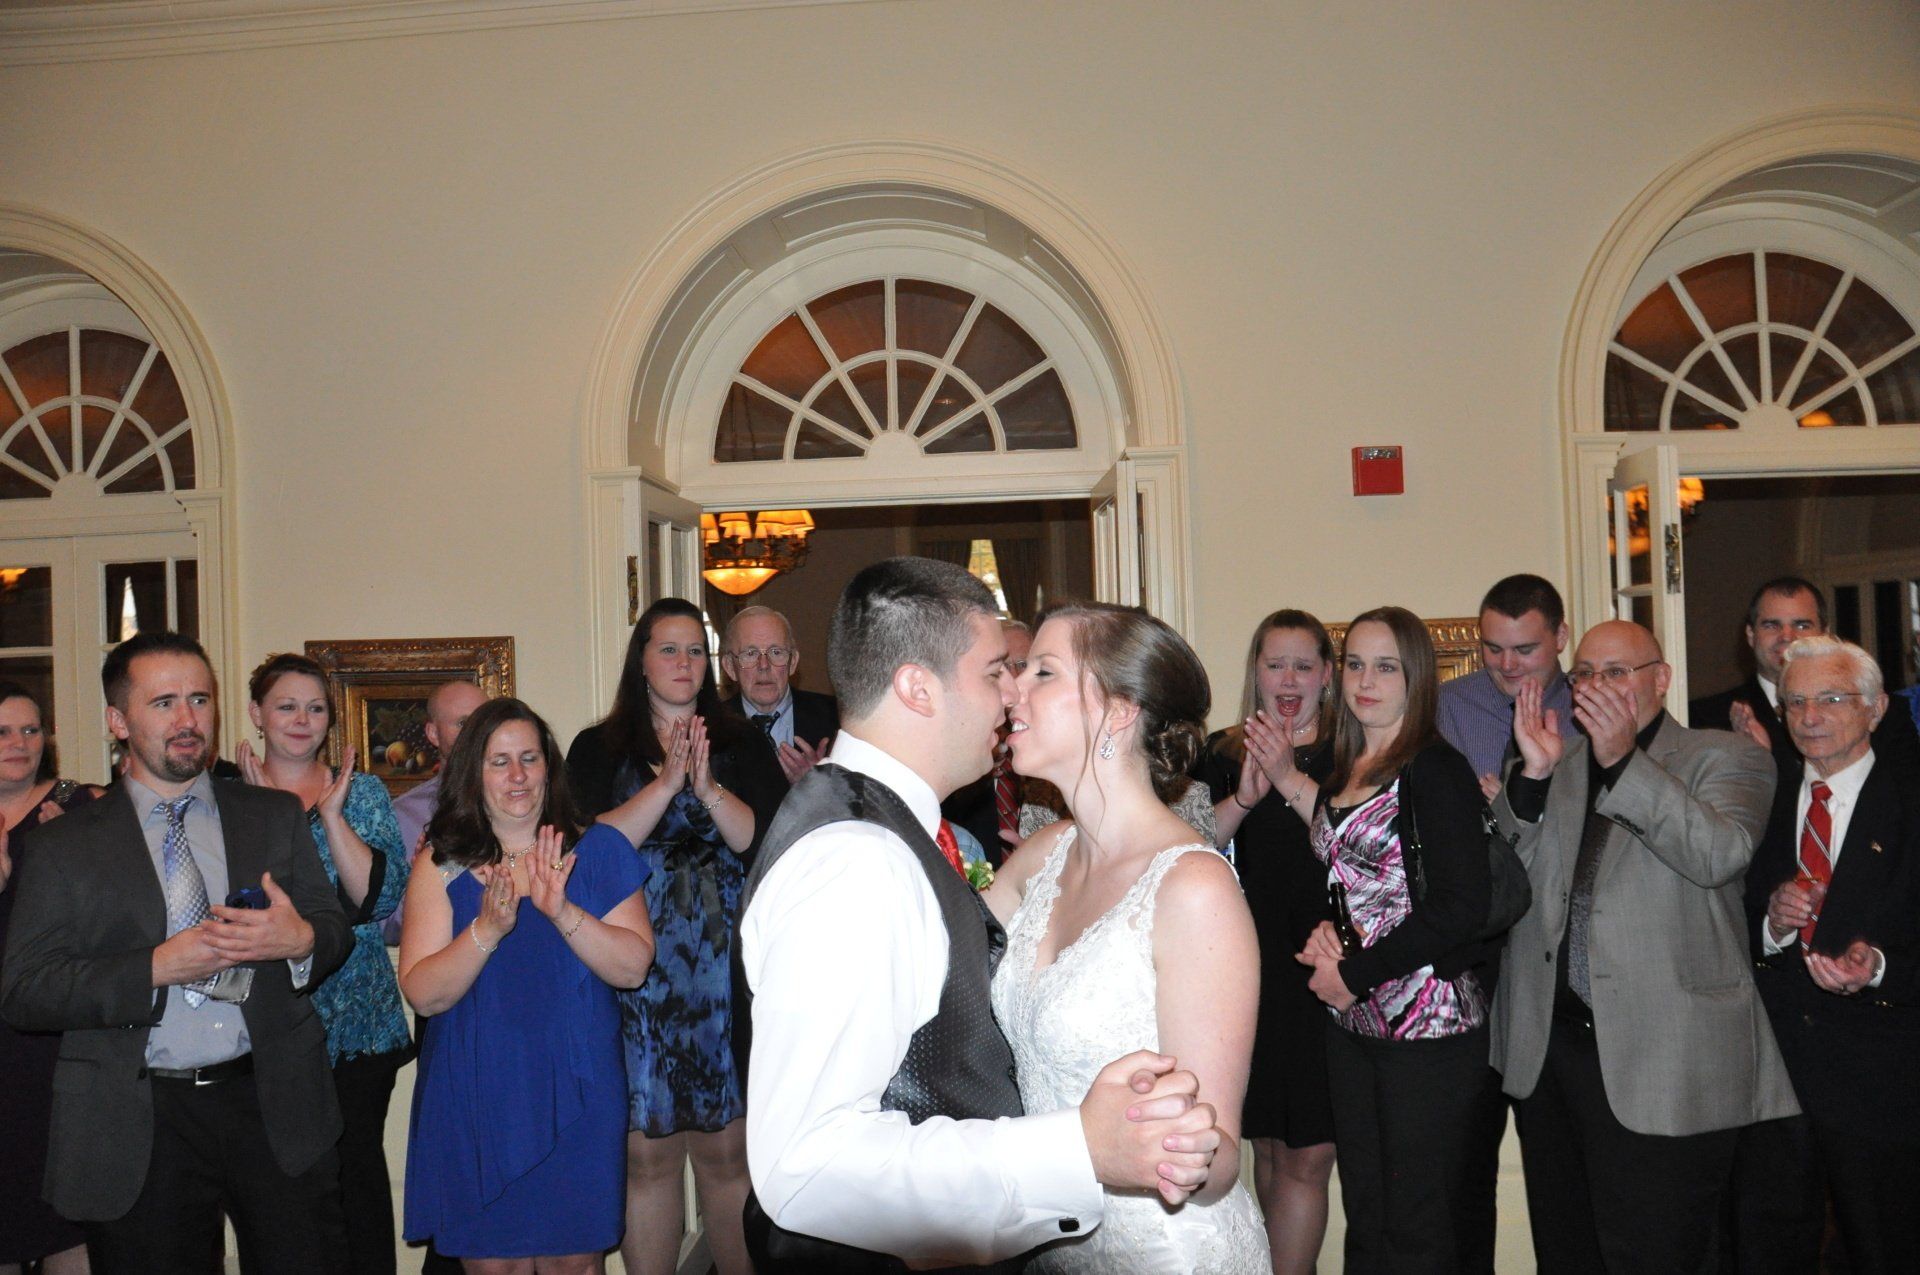 bride and groom dance, exeter inn, exeter, New Hampshire